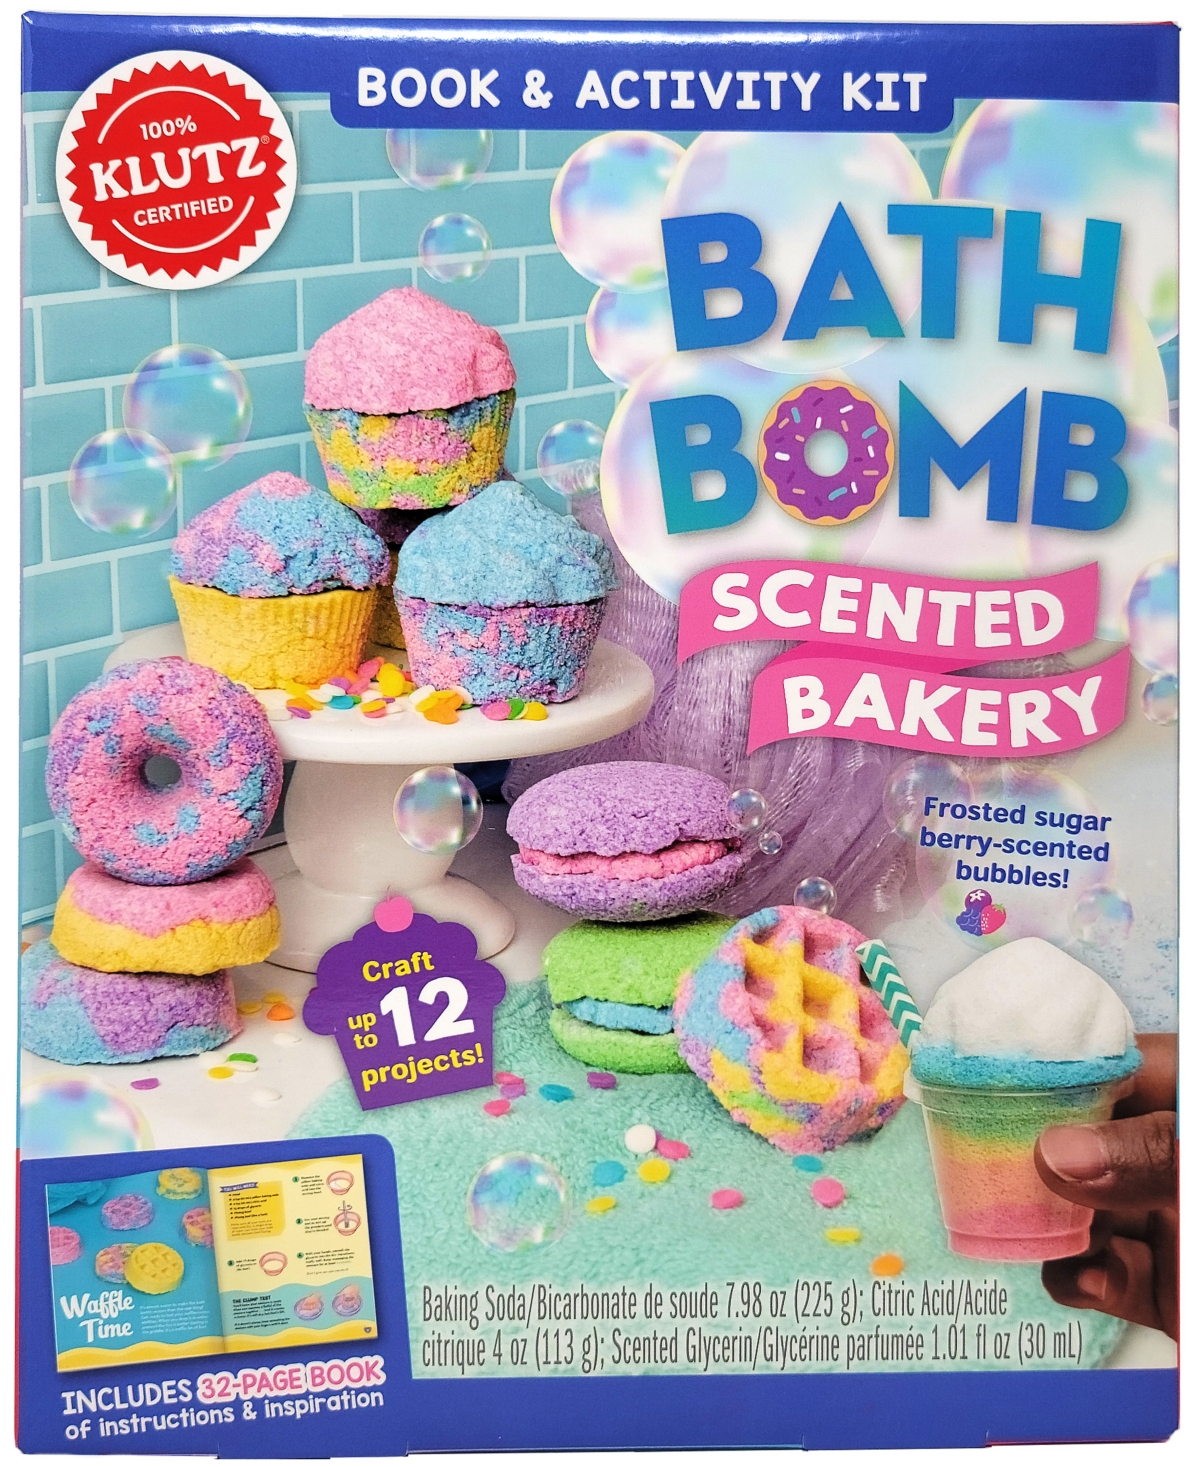 Klutz Kids' Bath Bomb Scented Bakery In No Color